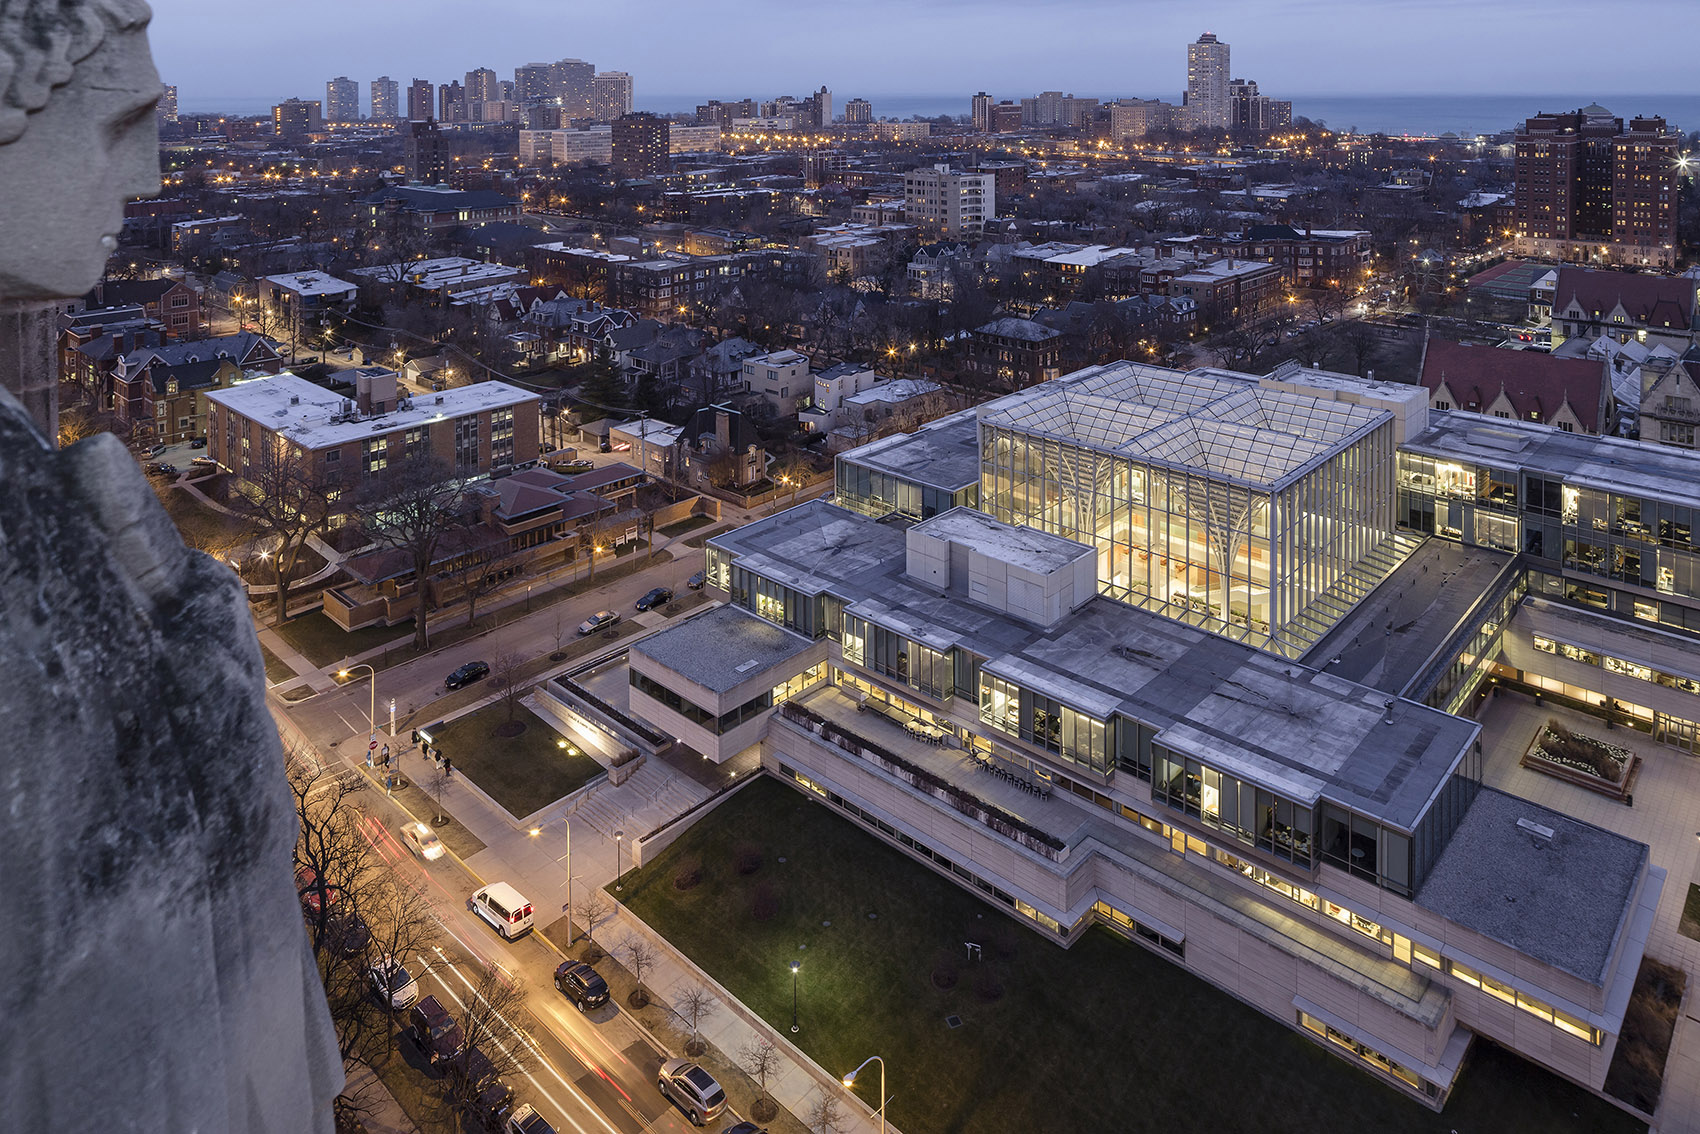 001 University Of Chicago Booth School Of Business By Rafael Viñoly Architects 